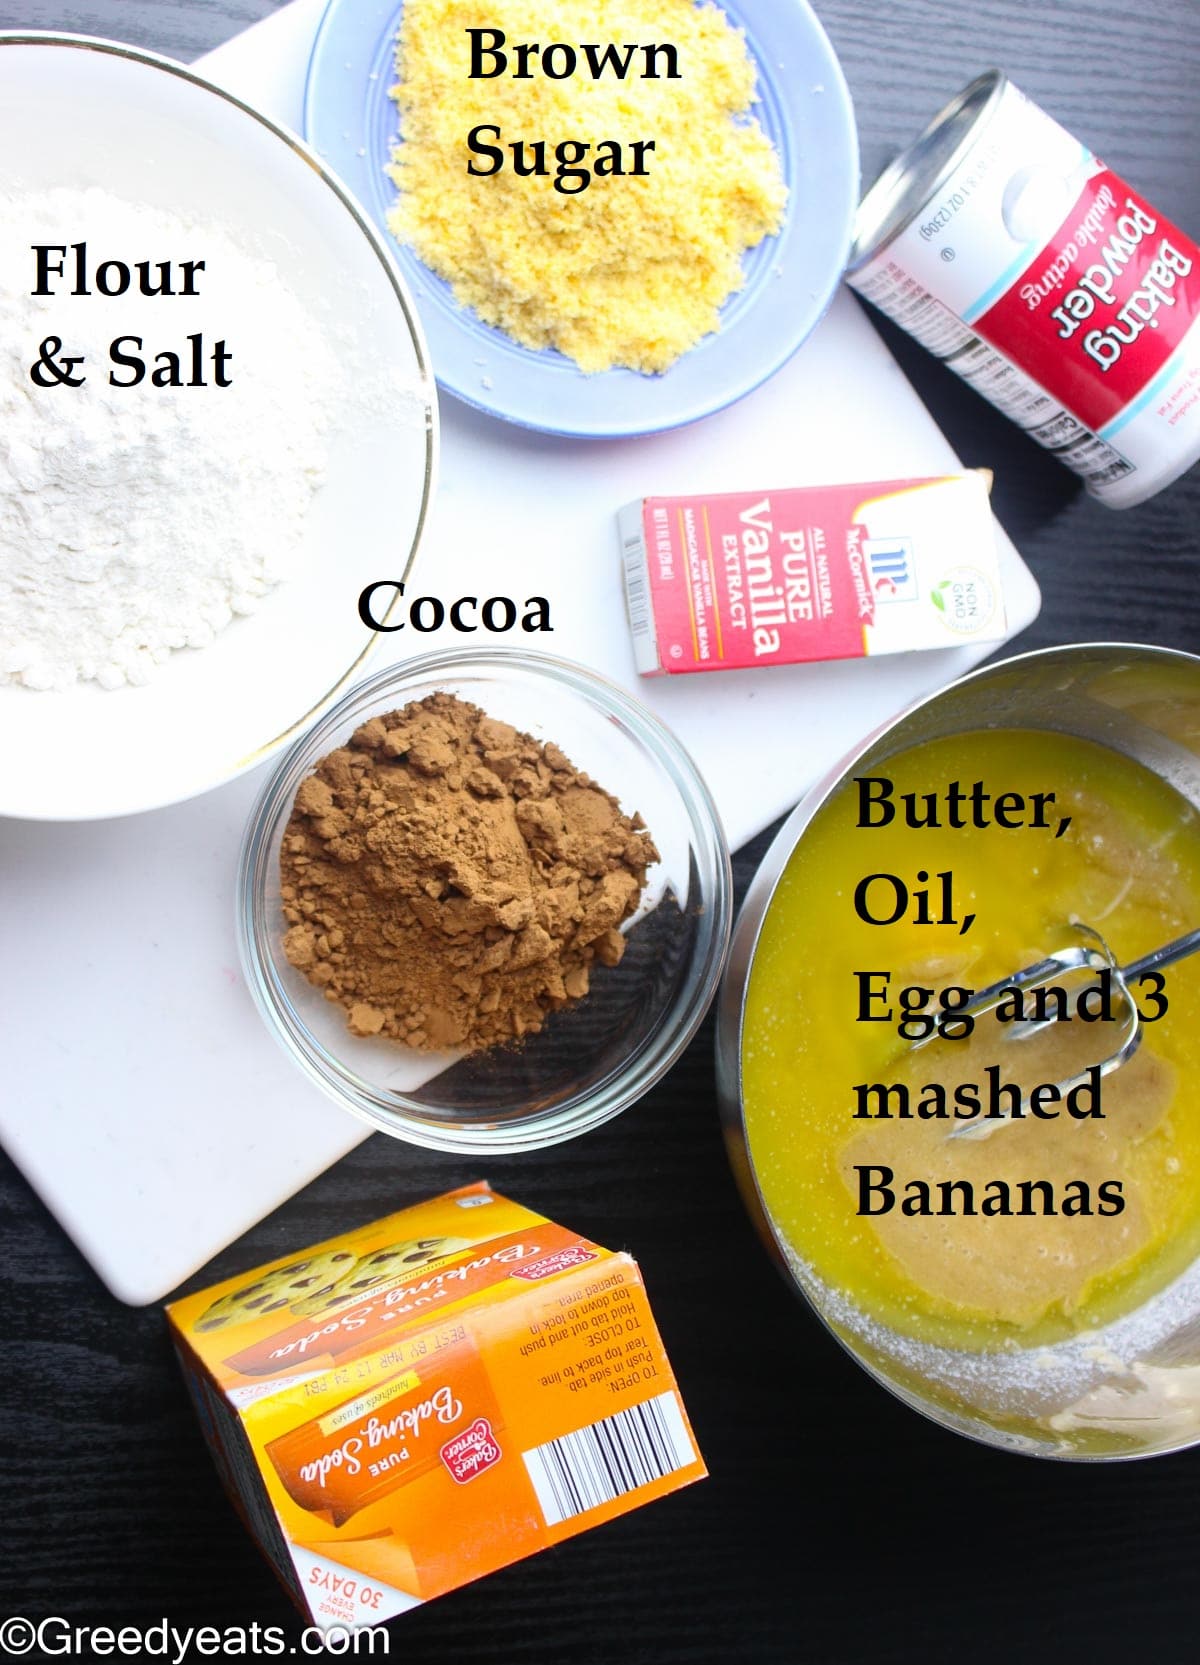 list of ingredients like flour, oil, butter sugar and bananas required to make banana bread.